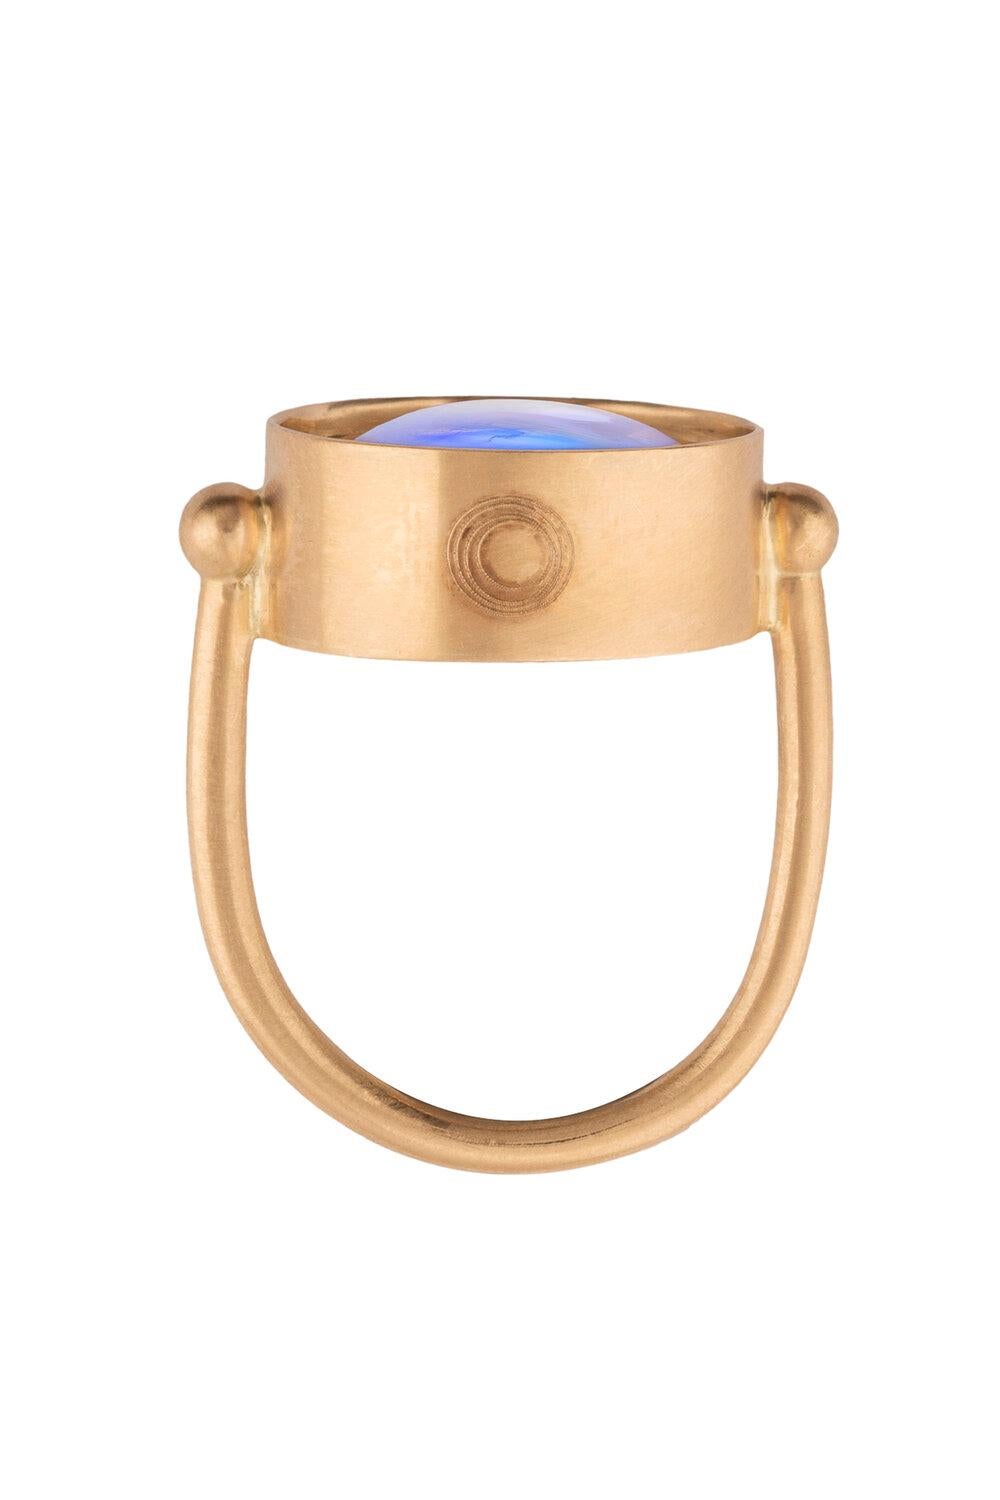 Modern Ouroboros Oval Rainbow Moonstone Ring set in 18kt Gold For Sale